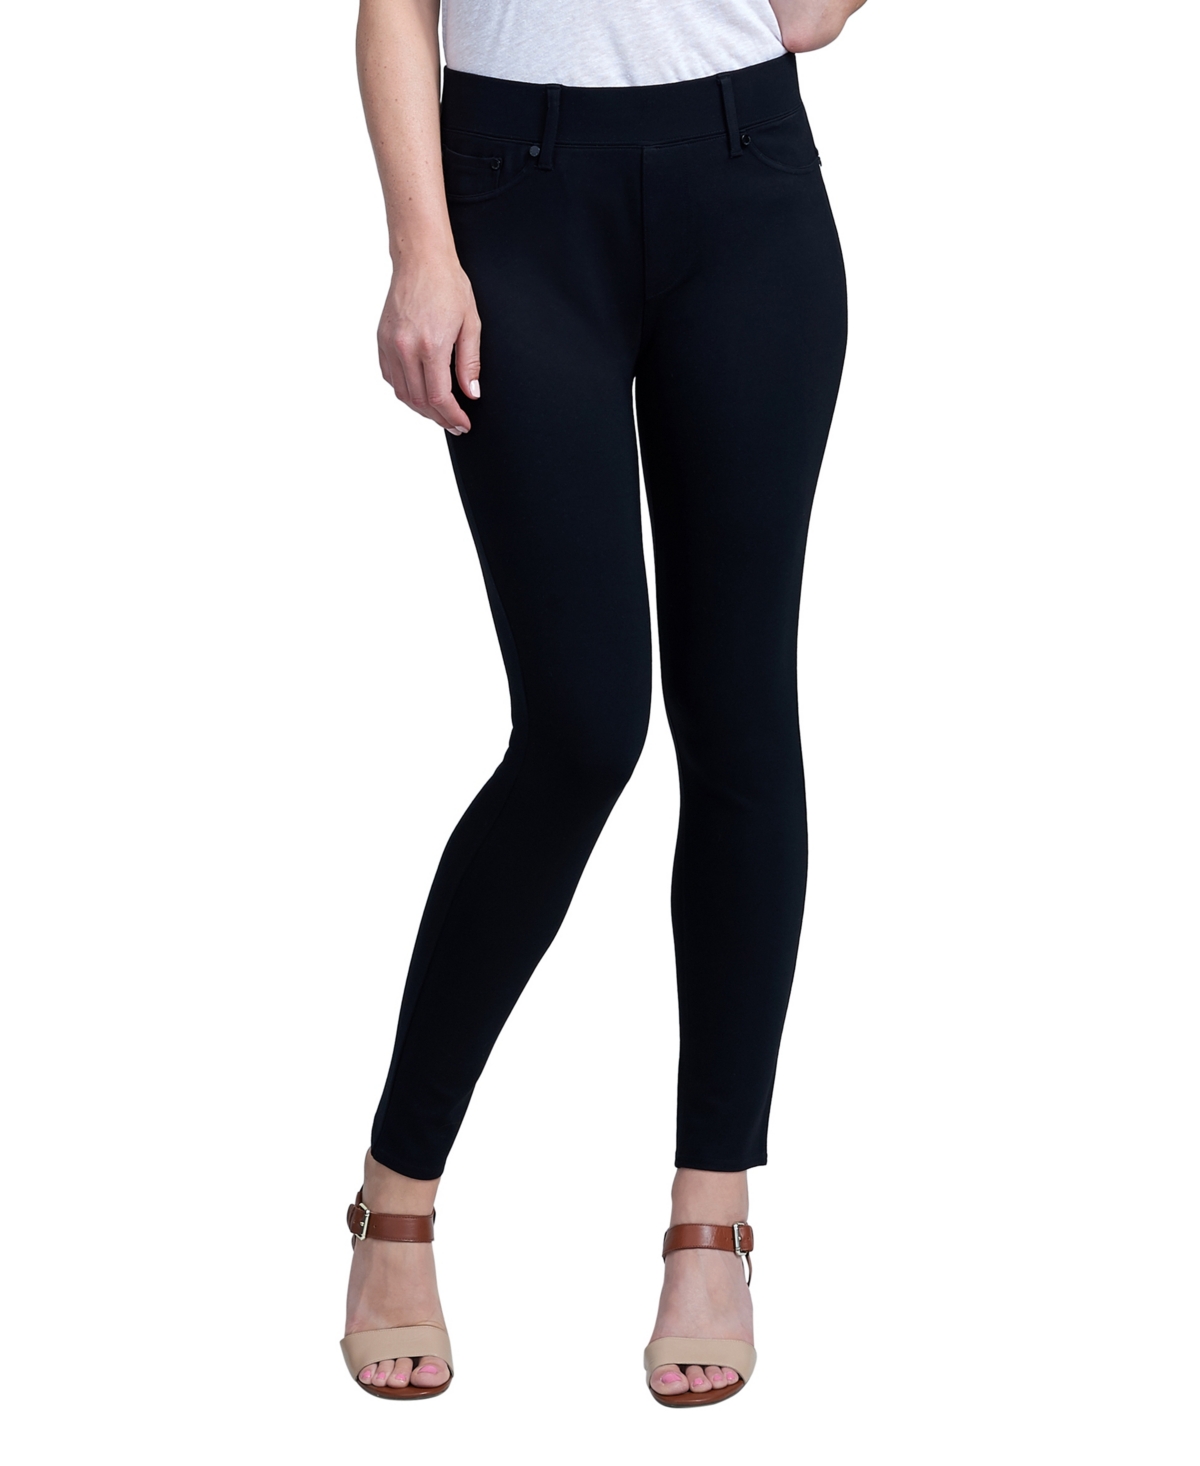 Women's 4-Way Stretch Pull on Ponte Pant